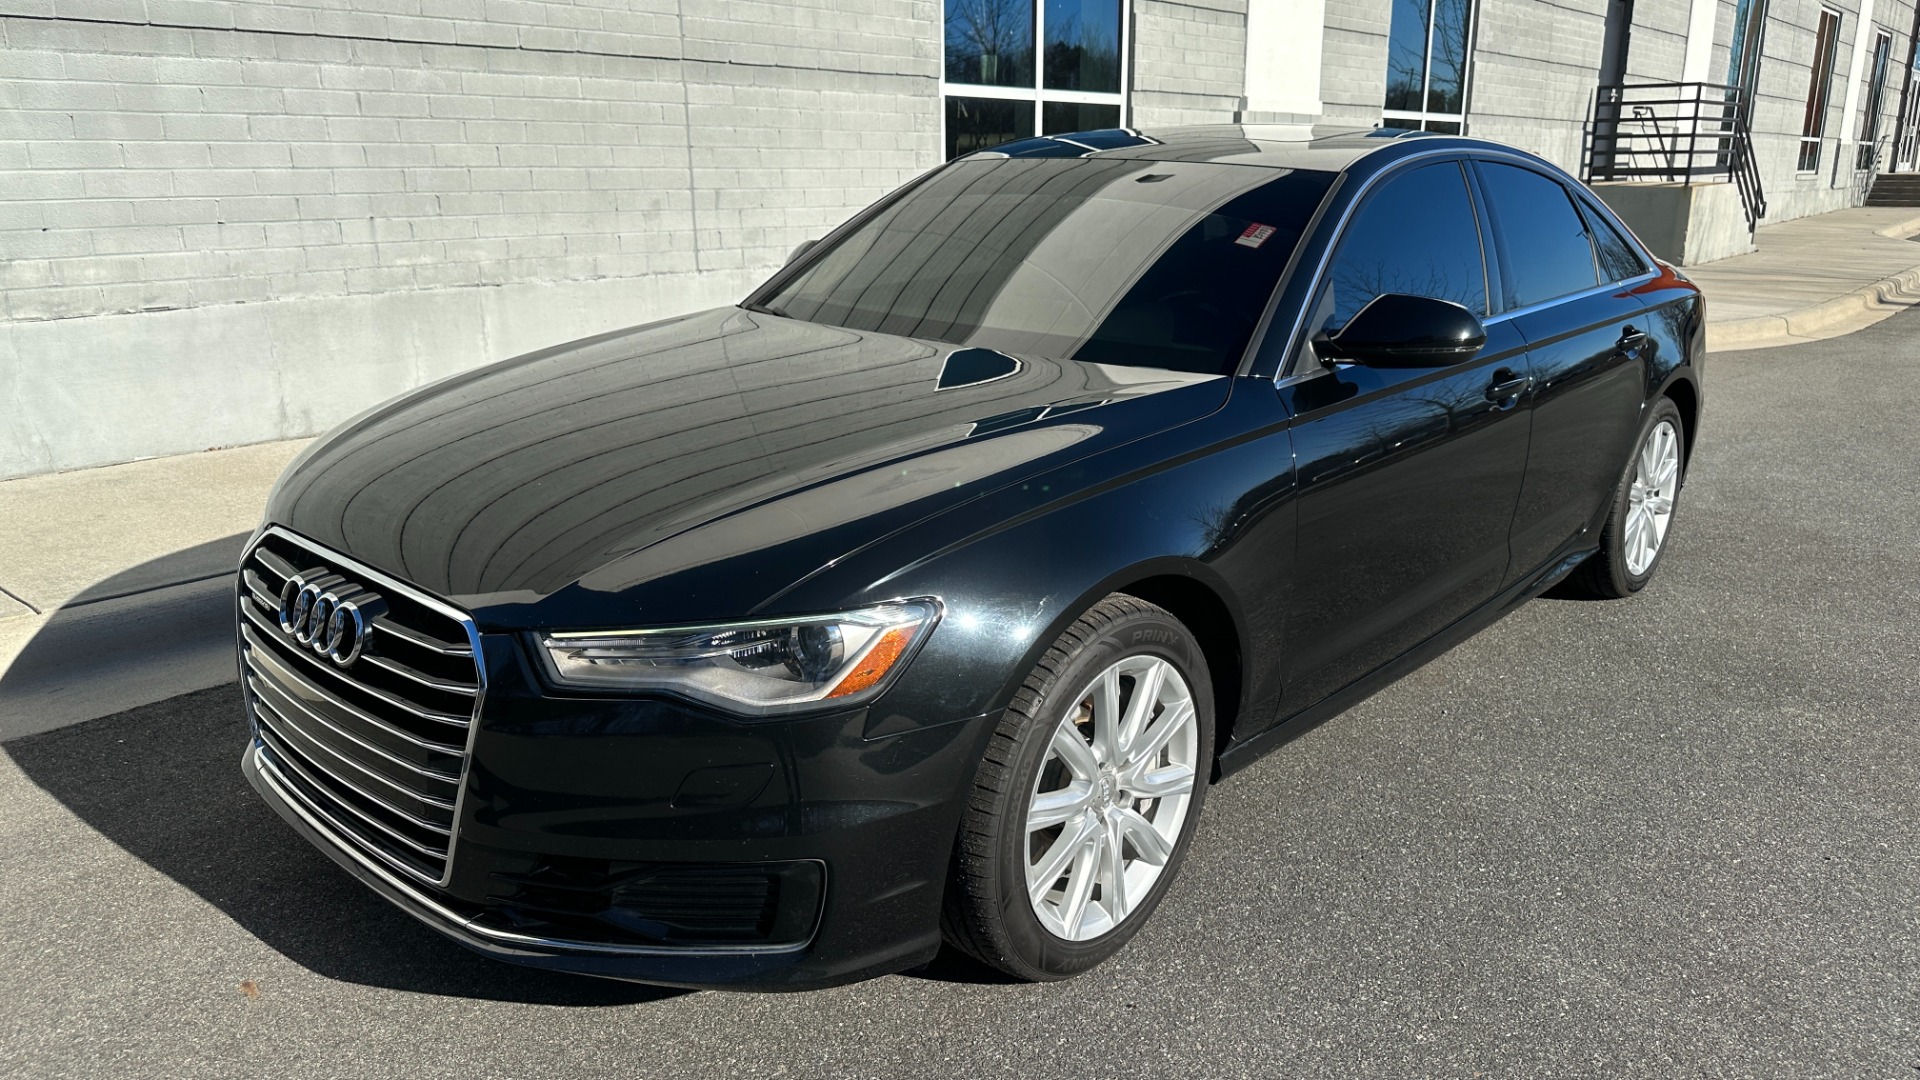 Used 2016 Audi A6 2.0T PREMIUM / LEATHER / SUNROOF / HEATED SEATS / QUATTRO ALL WHEEL DRIVE for sale Sold at Formula Imports in Charlotte NC 28227 2